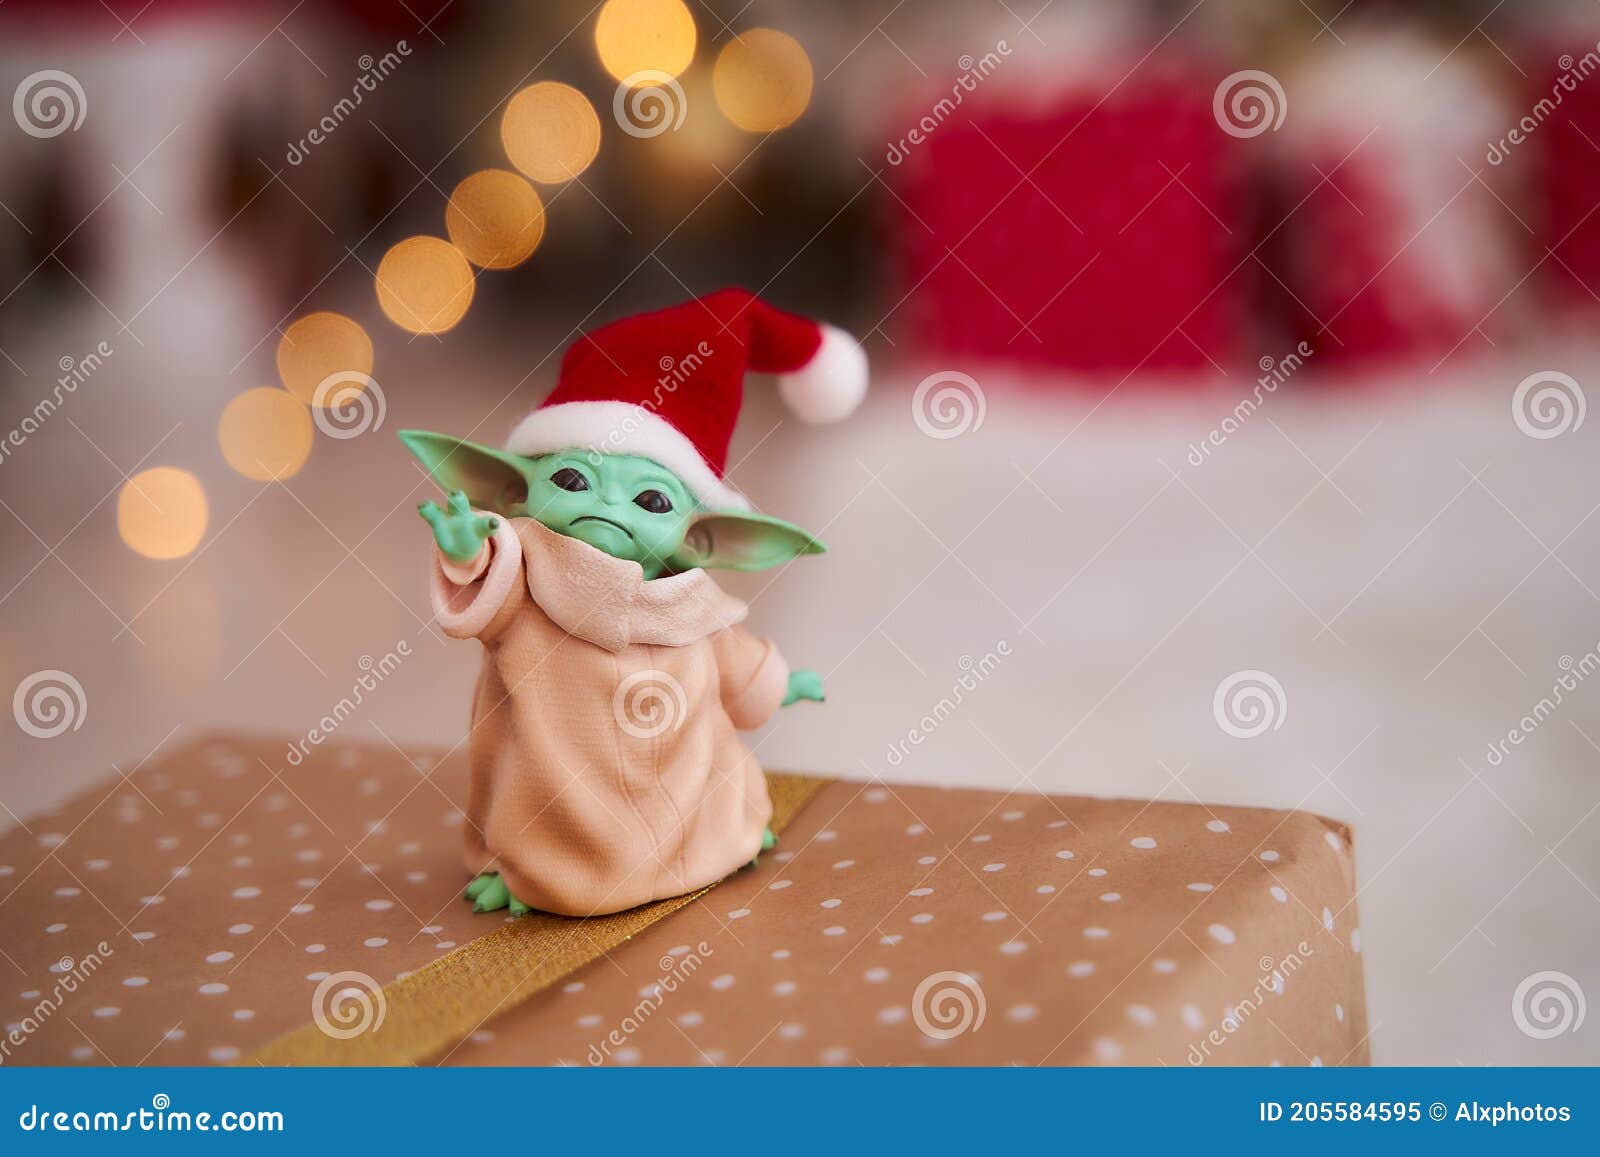 Dec, 2020: Display of Baby Yoda, an Action Figures, Standing in a ...